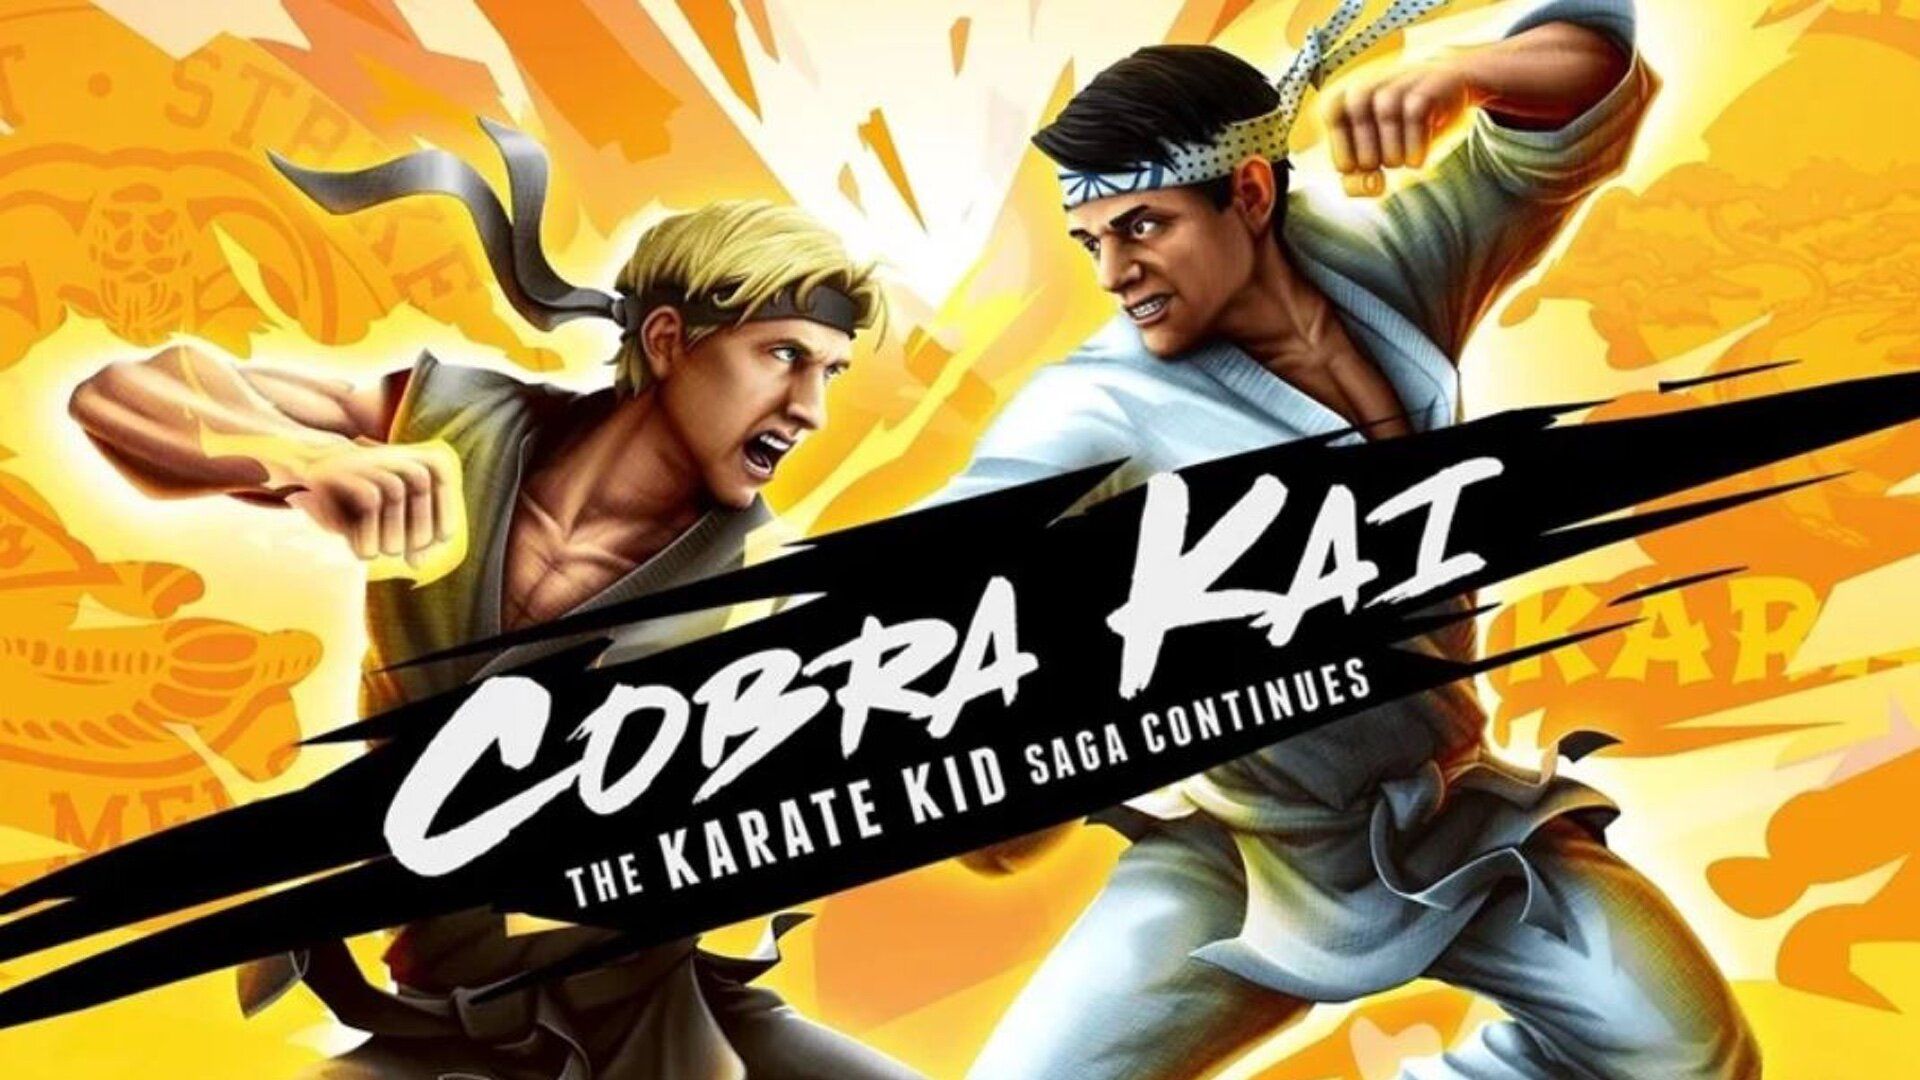 Cobra Kai: The Karate Kid Saga Continues Video Game Coming to PlayStation Xbox One & Nintendo Switch